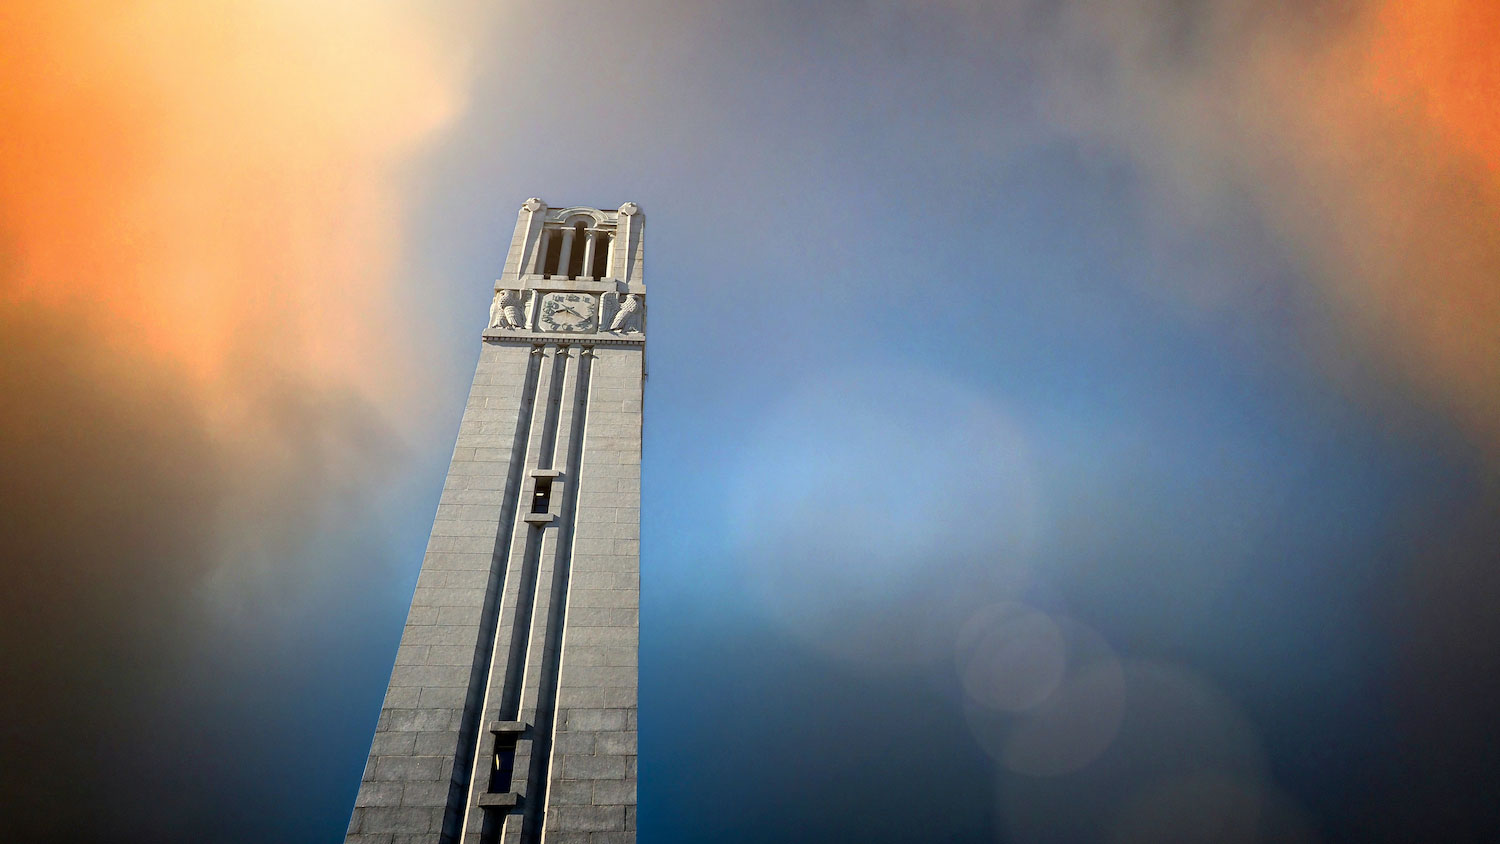 The Memorial Belltower on a cloudy day